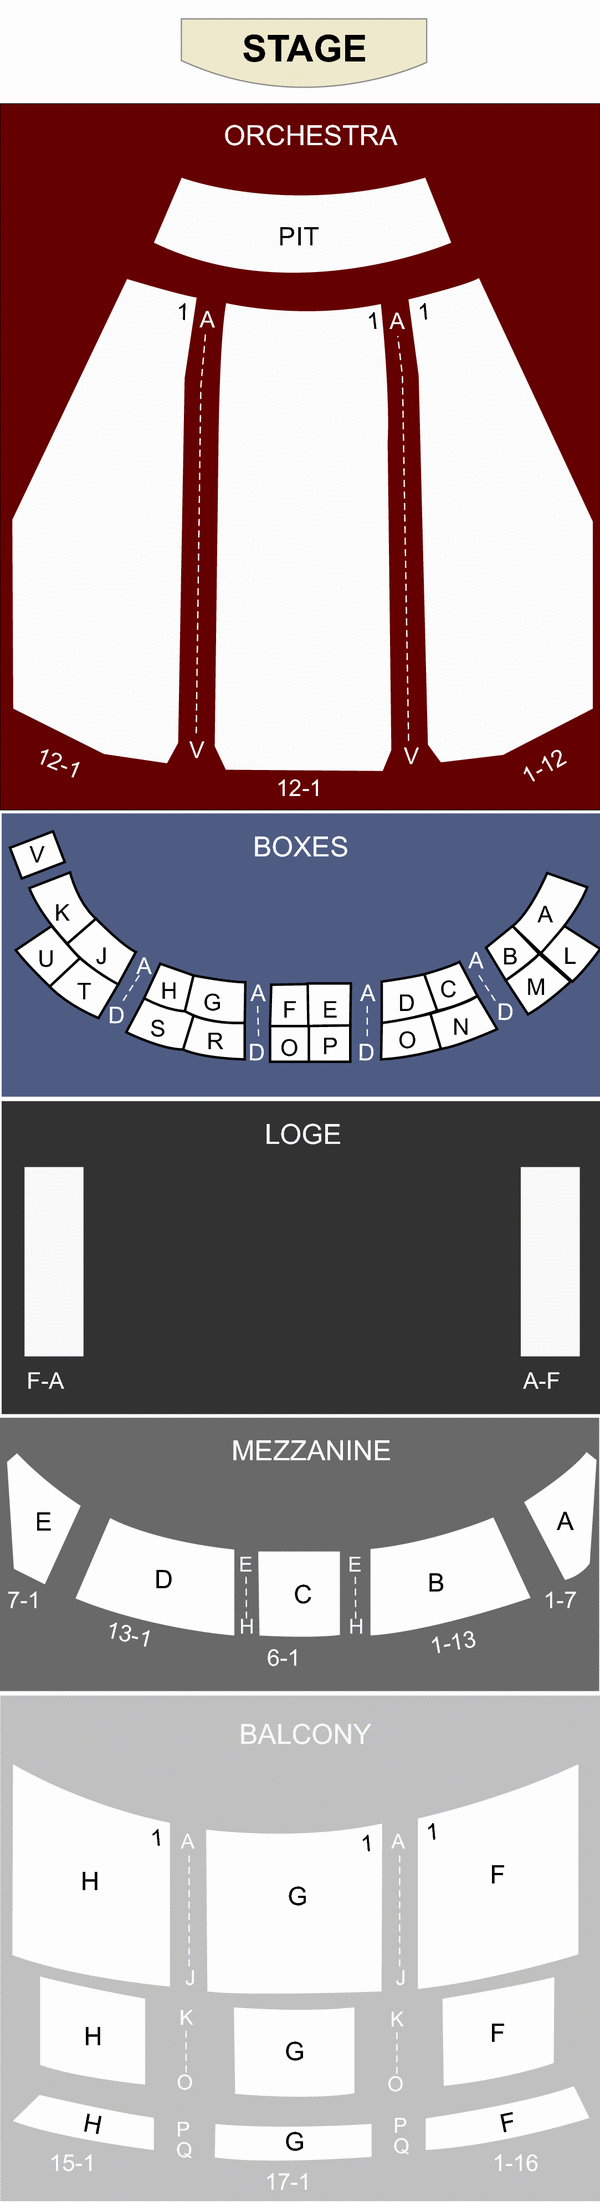 Majestic Theater, Dallas, TX - Seating Chart & Stage ...